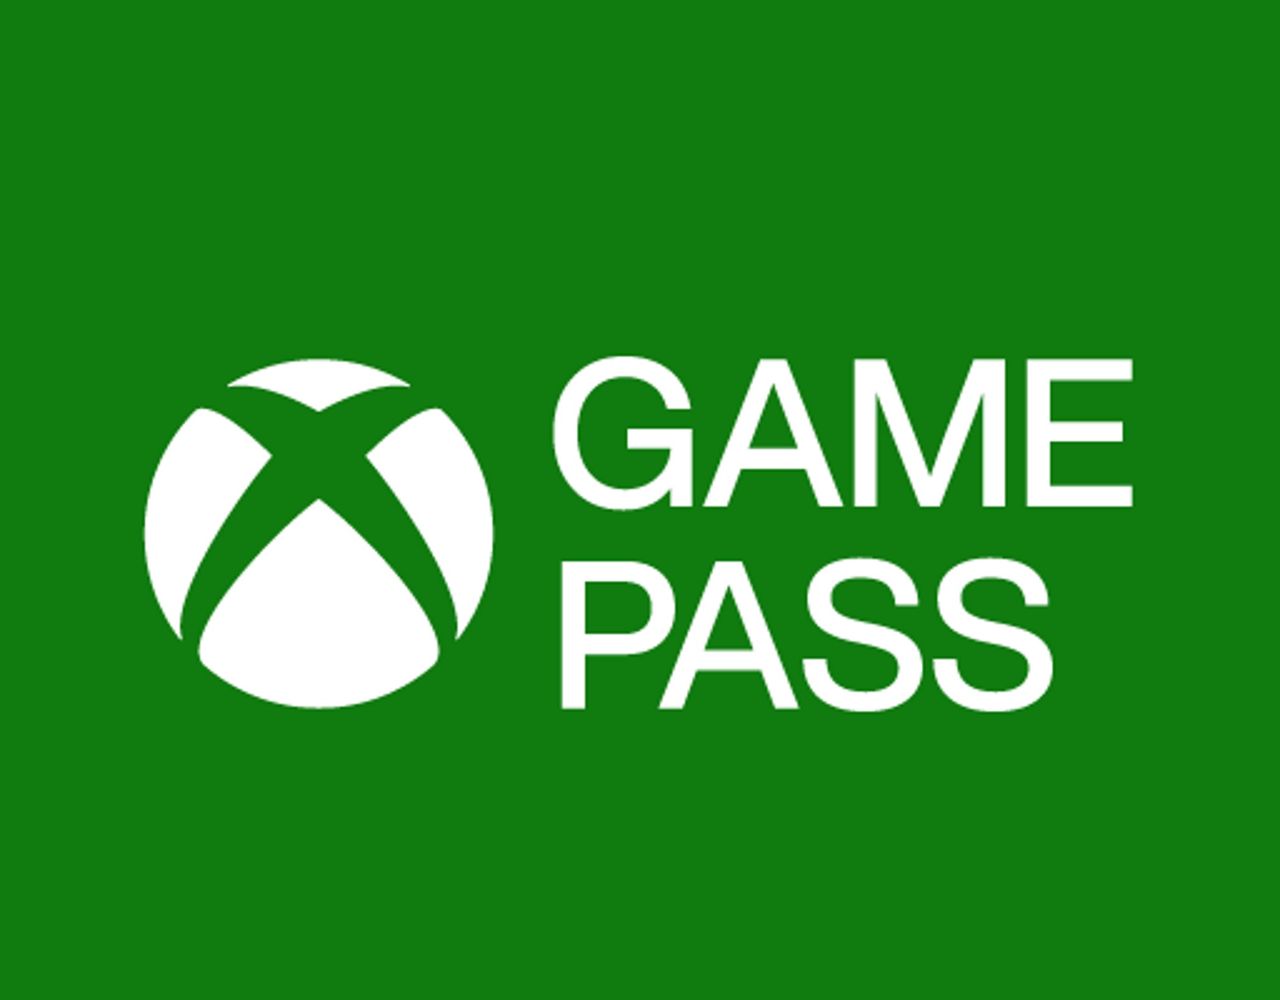 Cheaper Xbox Game Pass with ads?